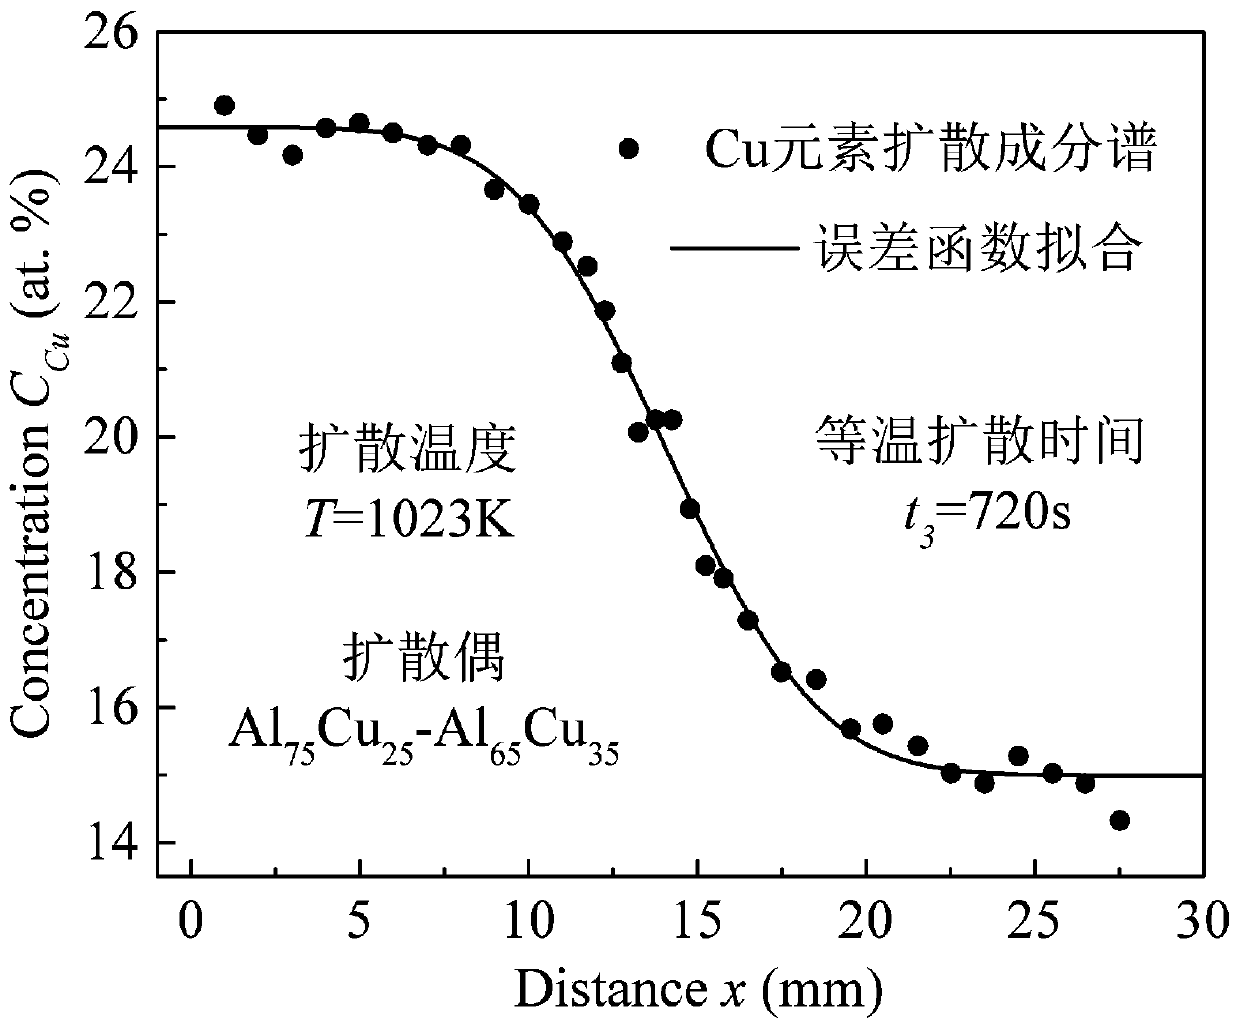 A Measuring Method of Interdiffusion Coefficient Eliminating the Effect of Cooling Process